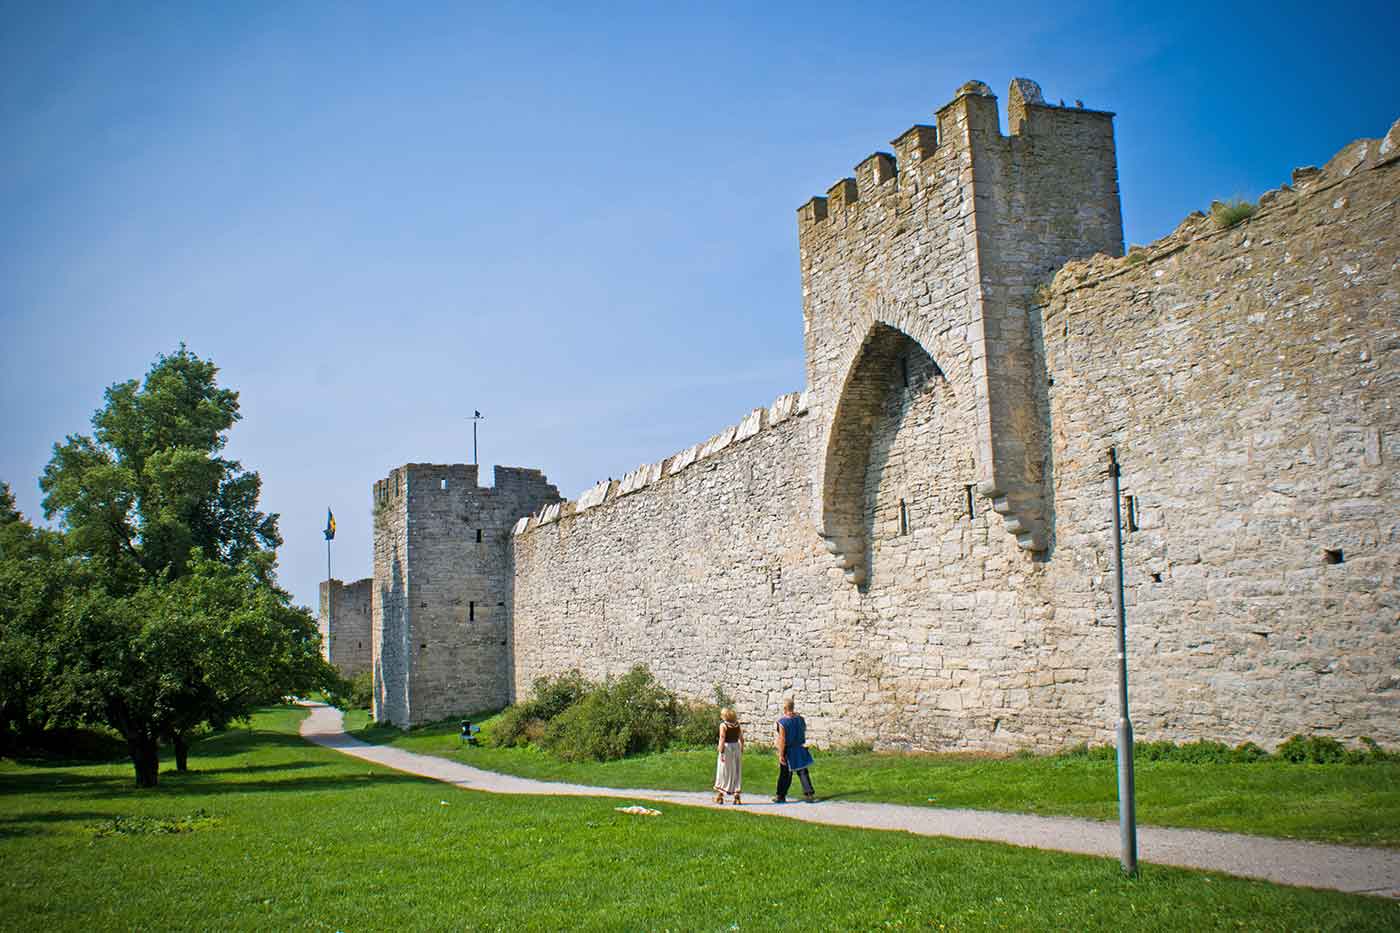 places to visit in visby sweden